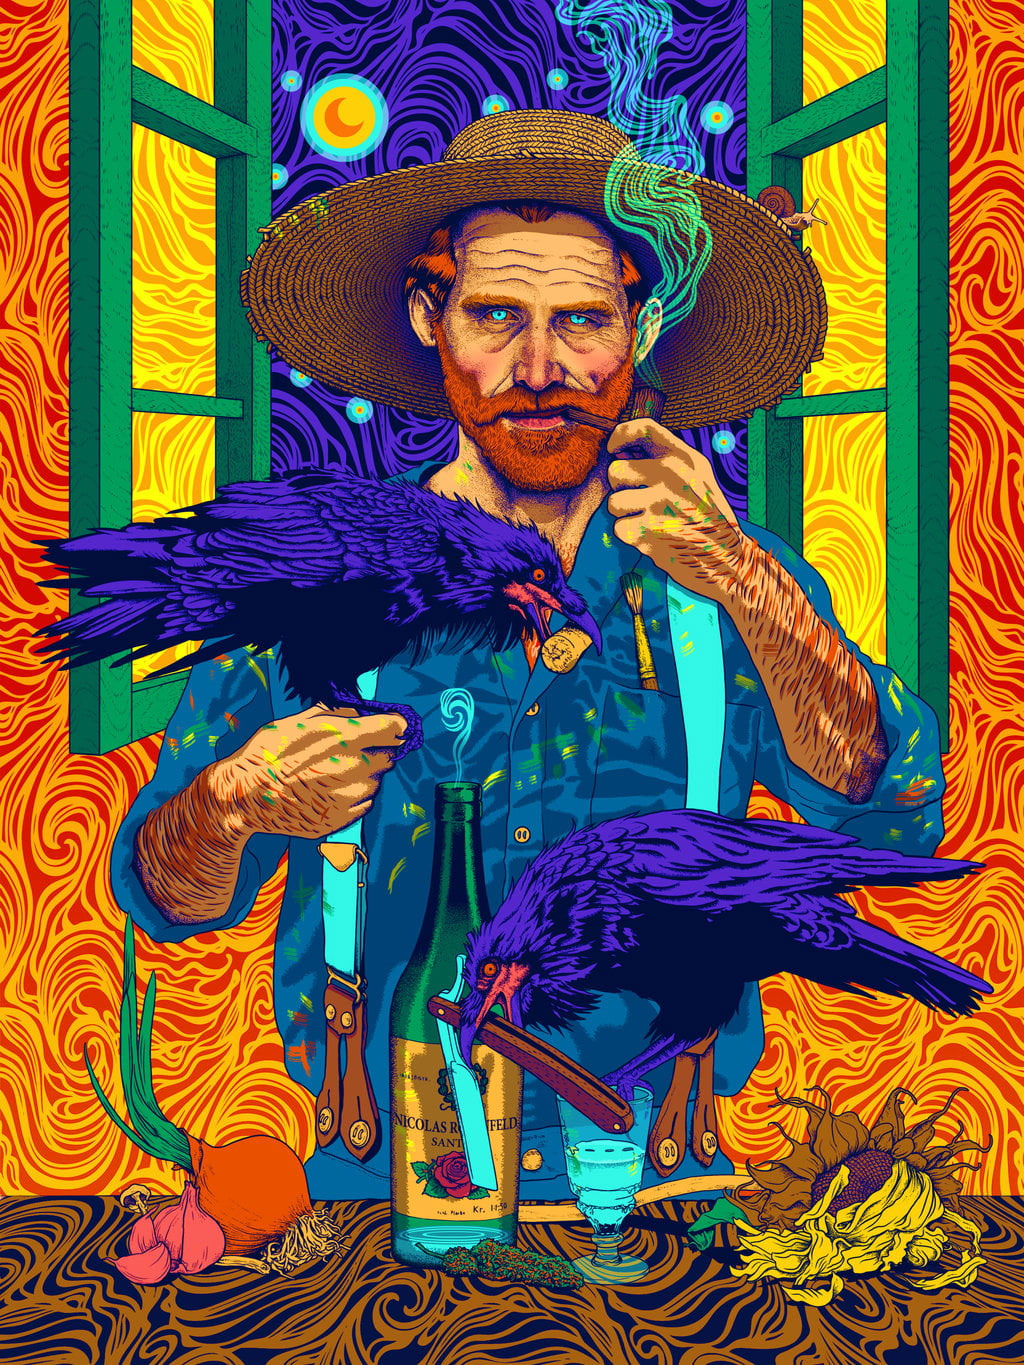 Vincent van Gogh wallpaper, smoking, colorful, abstract, crow, paint brushes